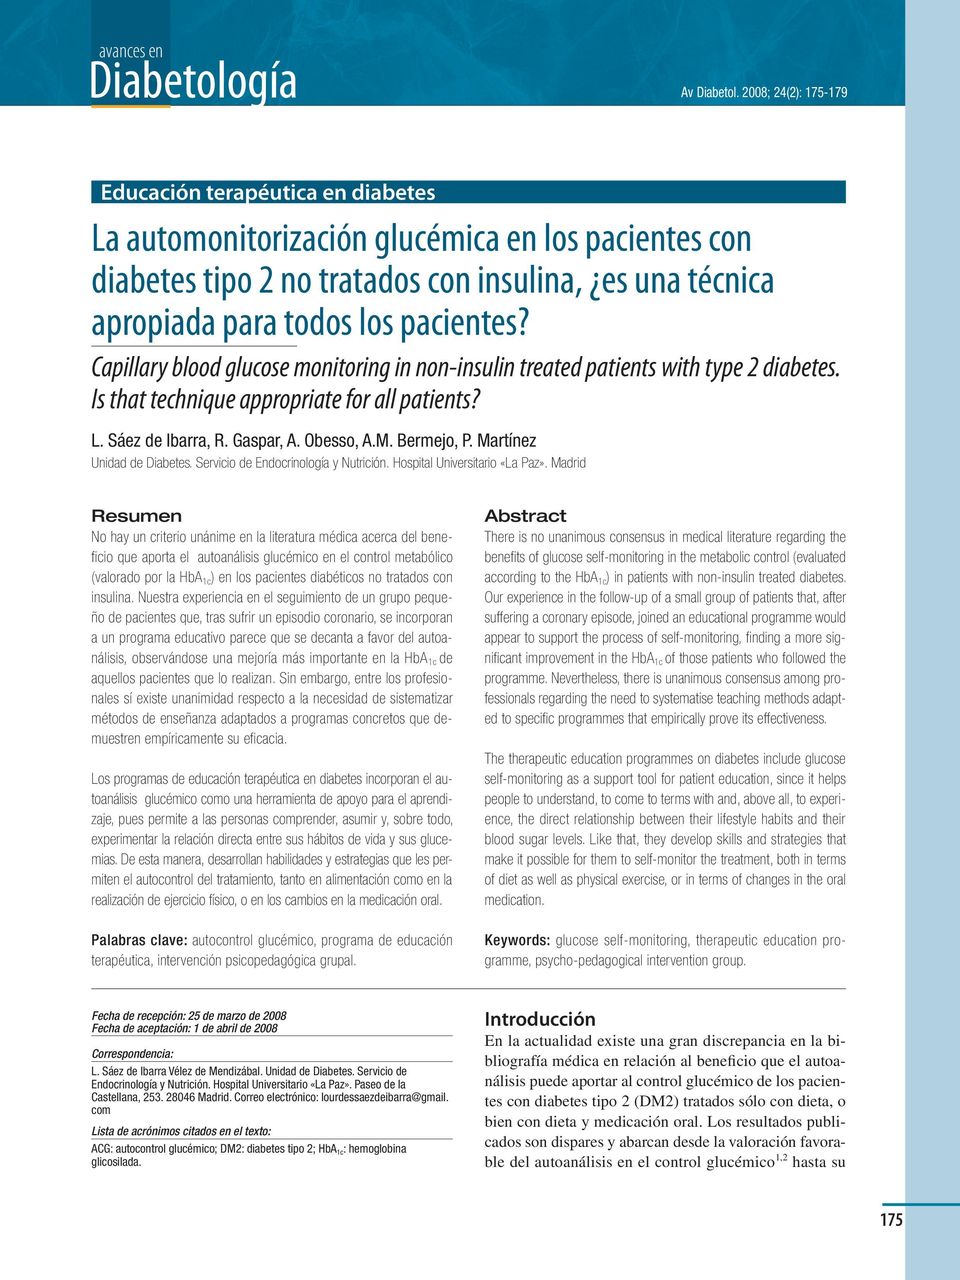 Capillary blood glucose monitoring in non-insulin treated patients with type 2 diabetes. Is that technique appropriate for all patients? L. Sáez de Ibarra, R. Gaspar, A. Obesso, A.M. Bermejo, P.